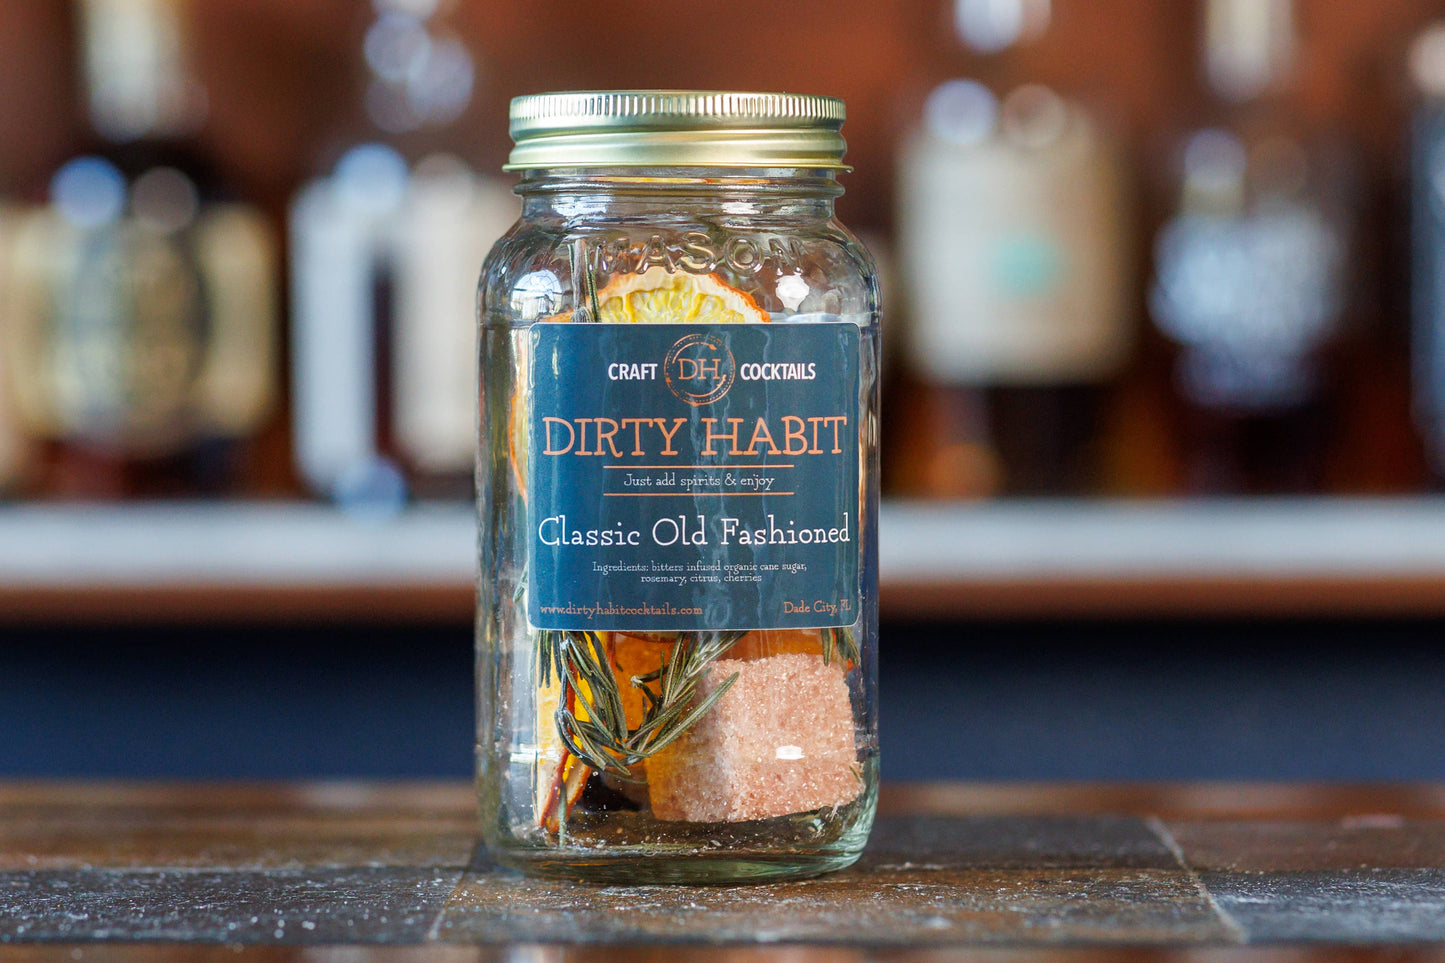 Dirty Habit Cocktails - Classic Dirty Habit Old Fashioned